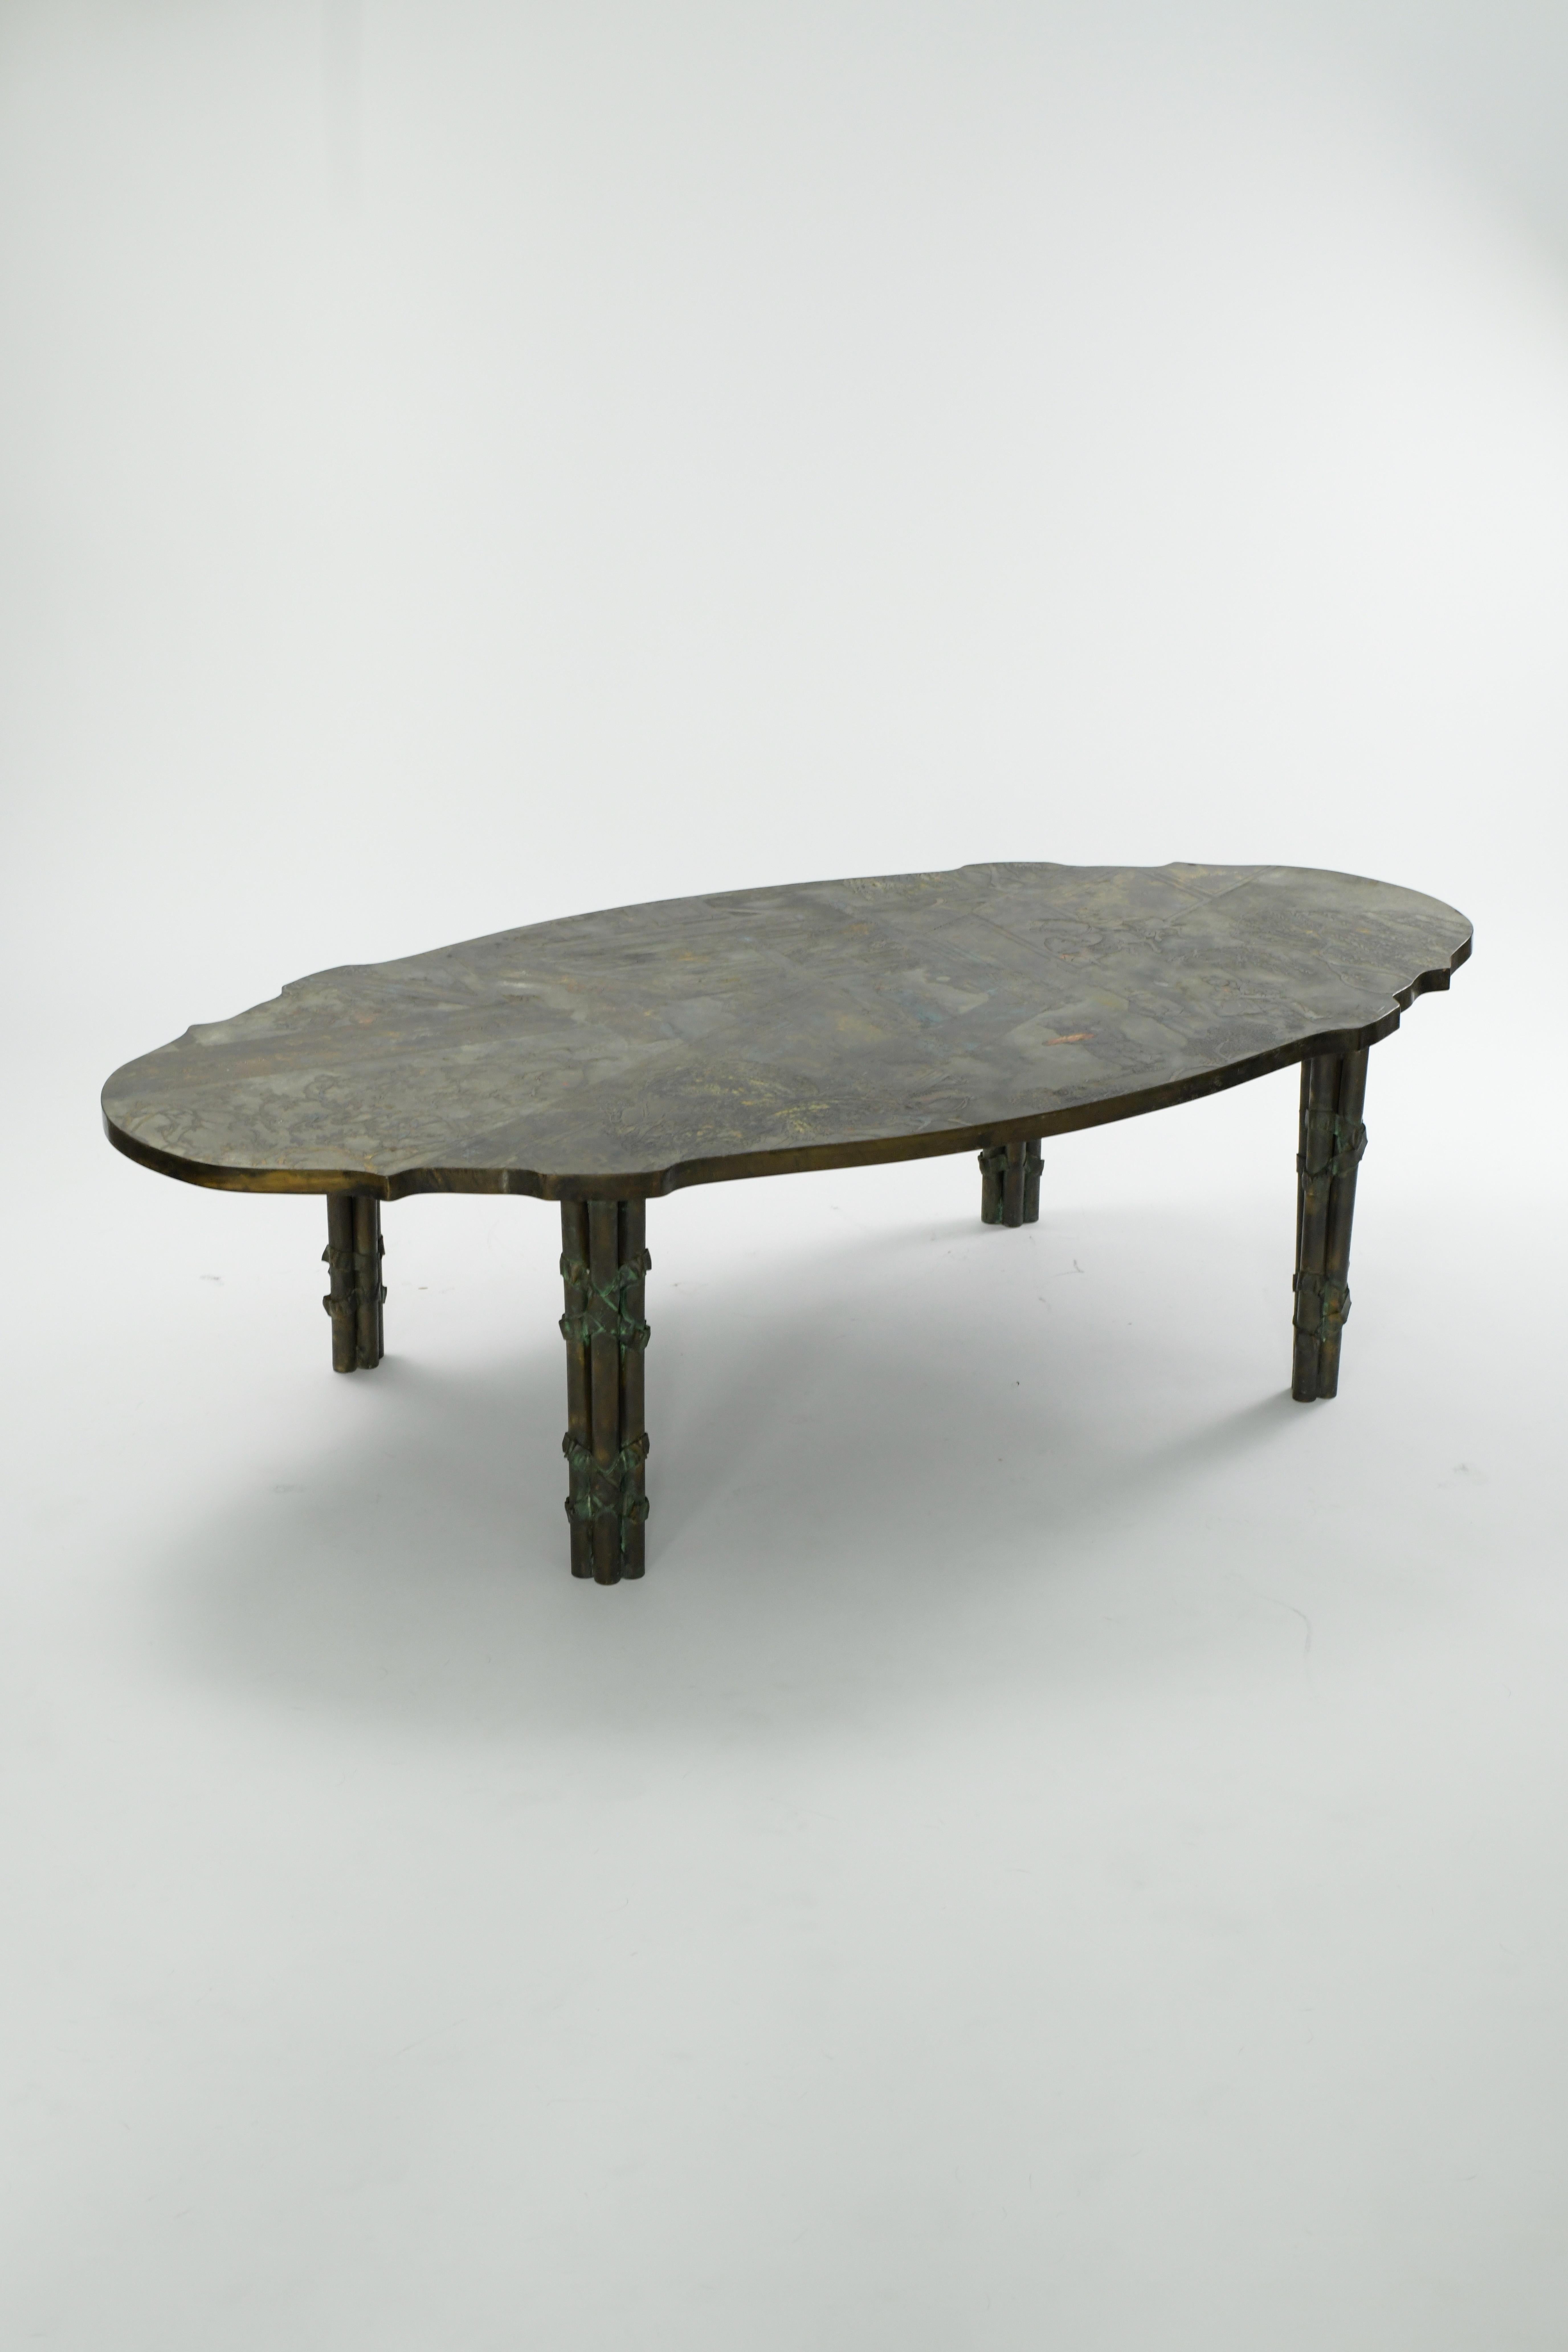 Absolutely gorgeous 1960s example of the 'Chan' coffee table by Philip and Kelvin LaVerne. The etched, enameled and patinated bronze table top sits on bundled bronze tube legs. The table has a really nice patina commensurate with age. No flaws